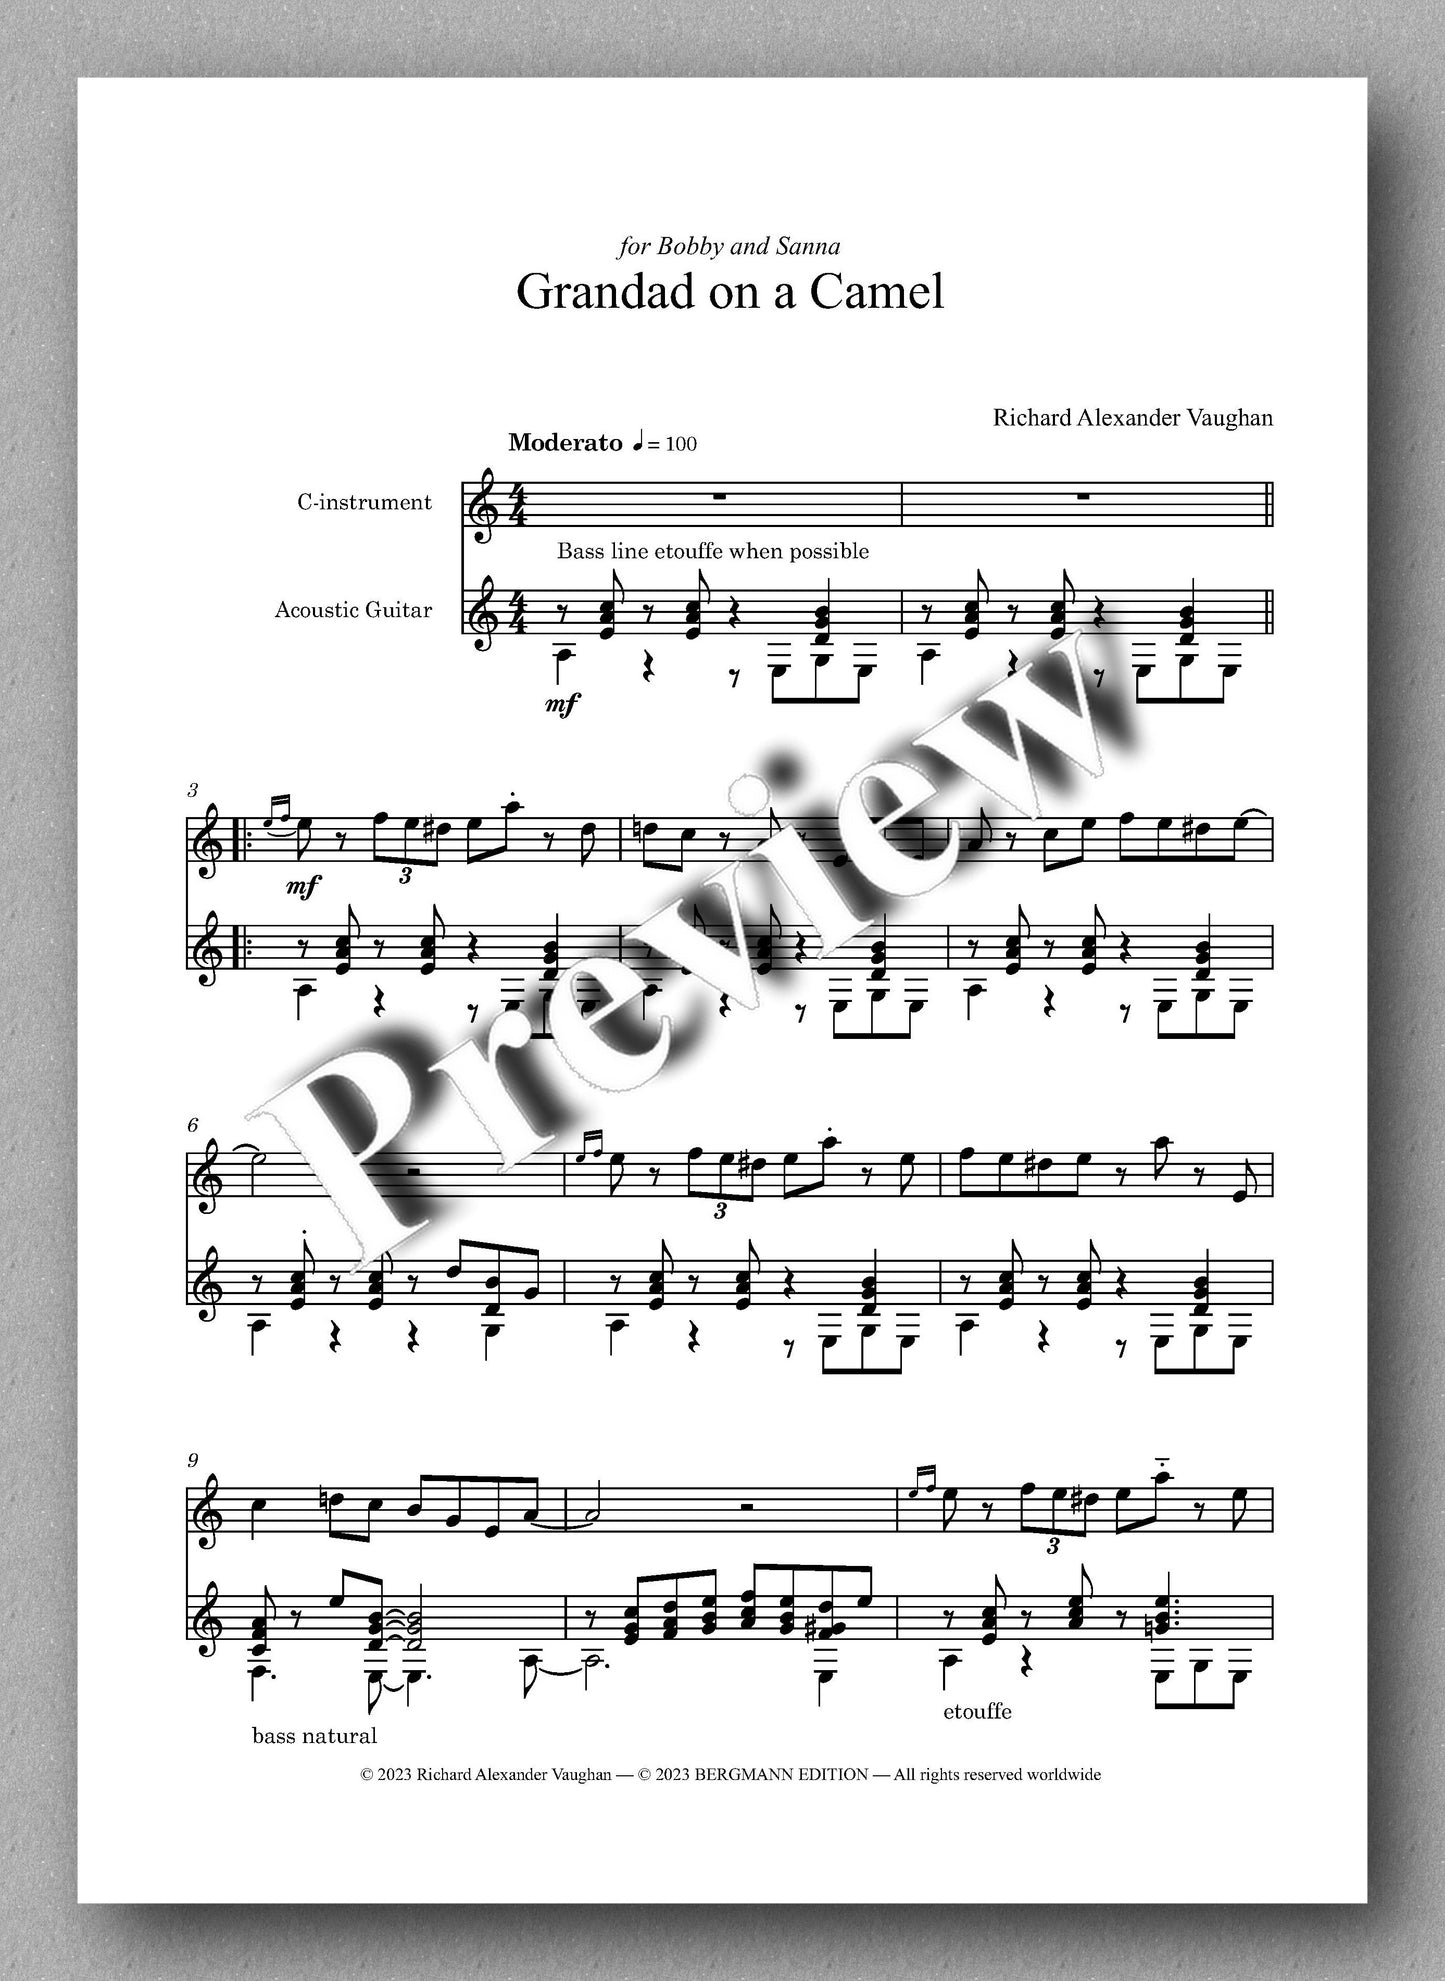 Grandad on a Camel by Richard Alexander Vaughan - preview of the music score 1